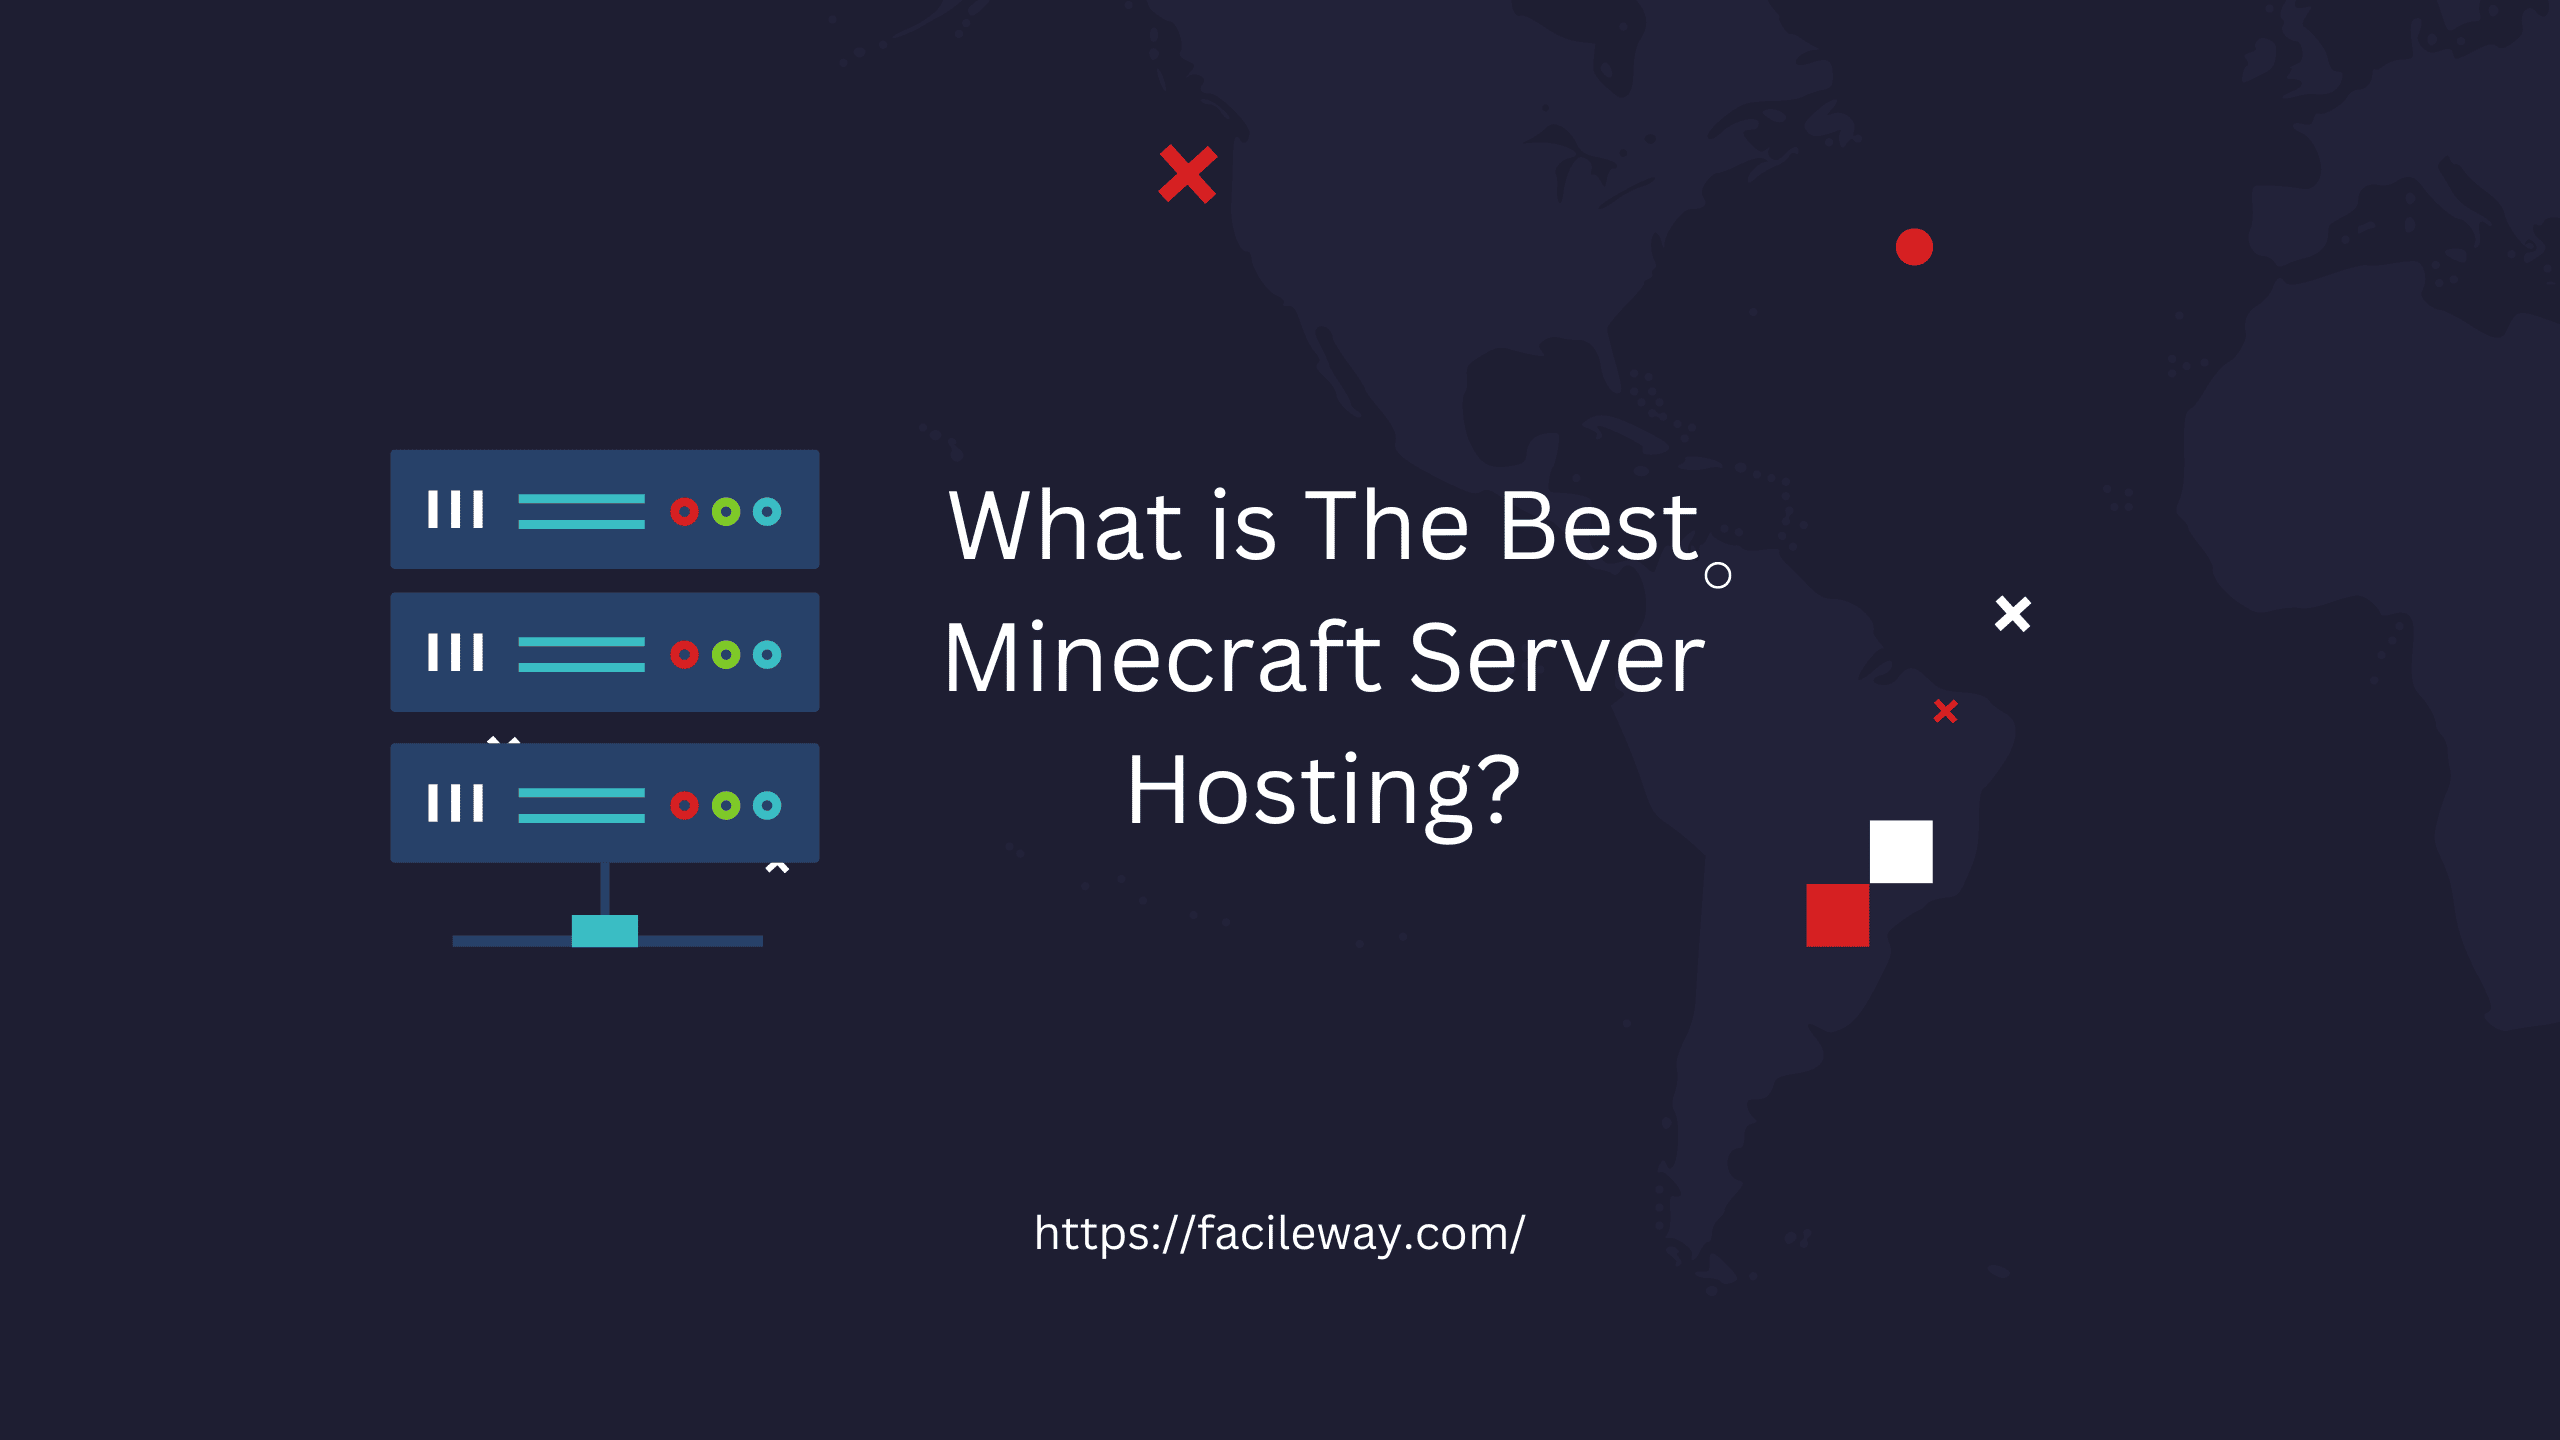 What is the best Minecraft Server hosting